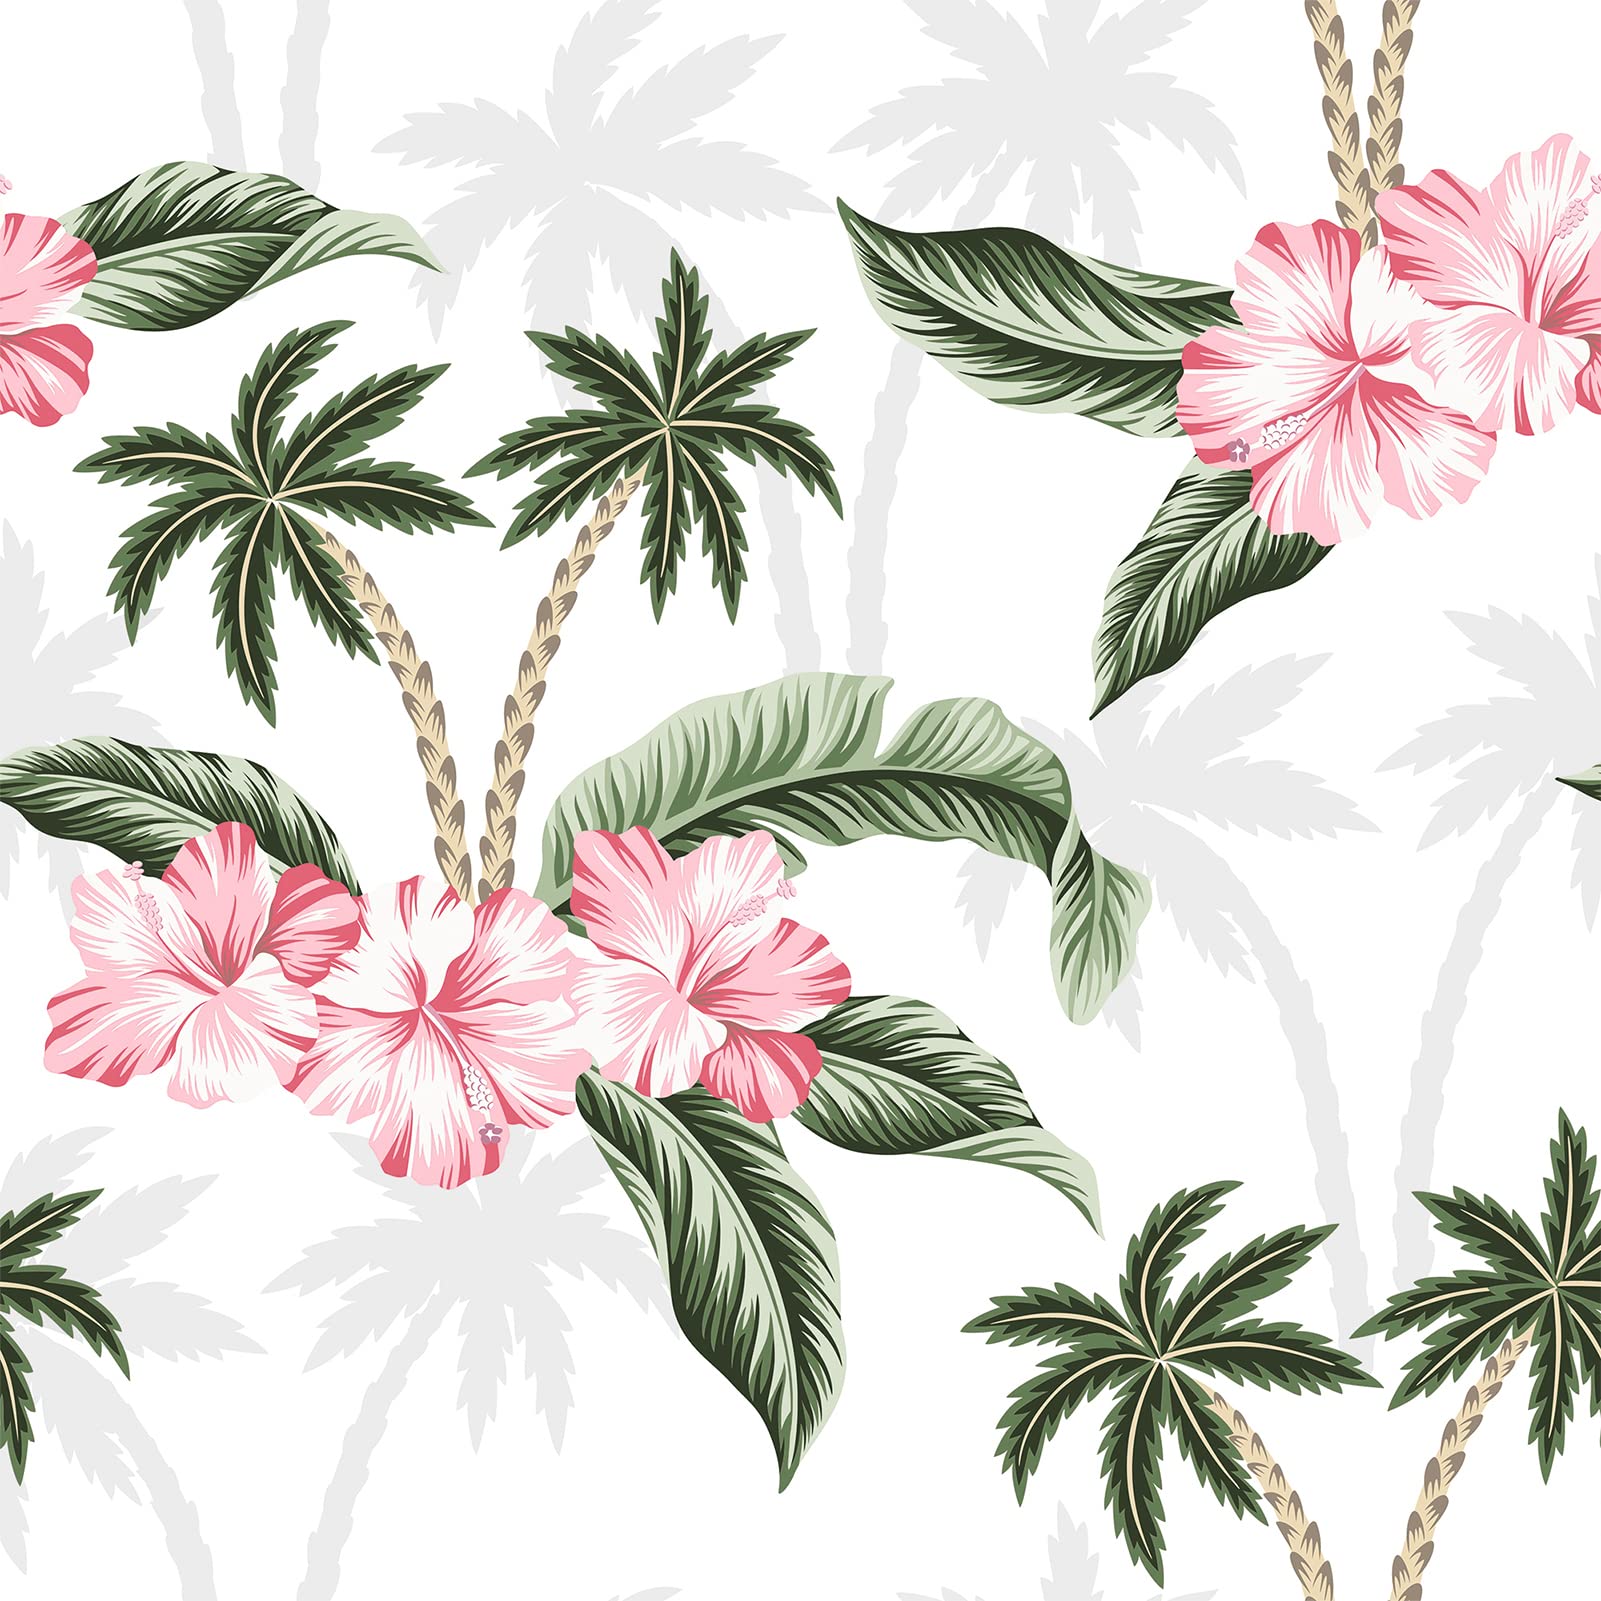 A seamless pattern with tropical palm trees and pink hibiscus flowers - Botanical